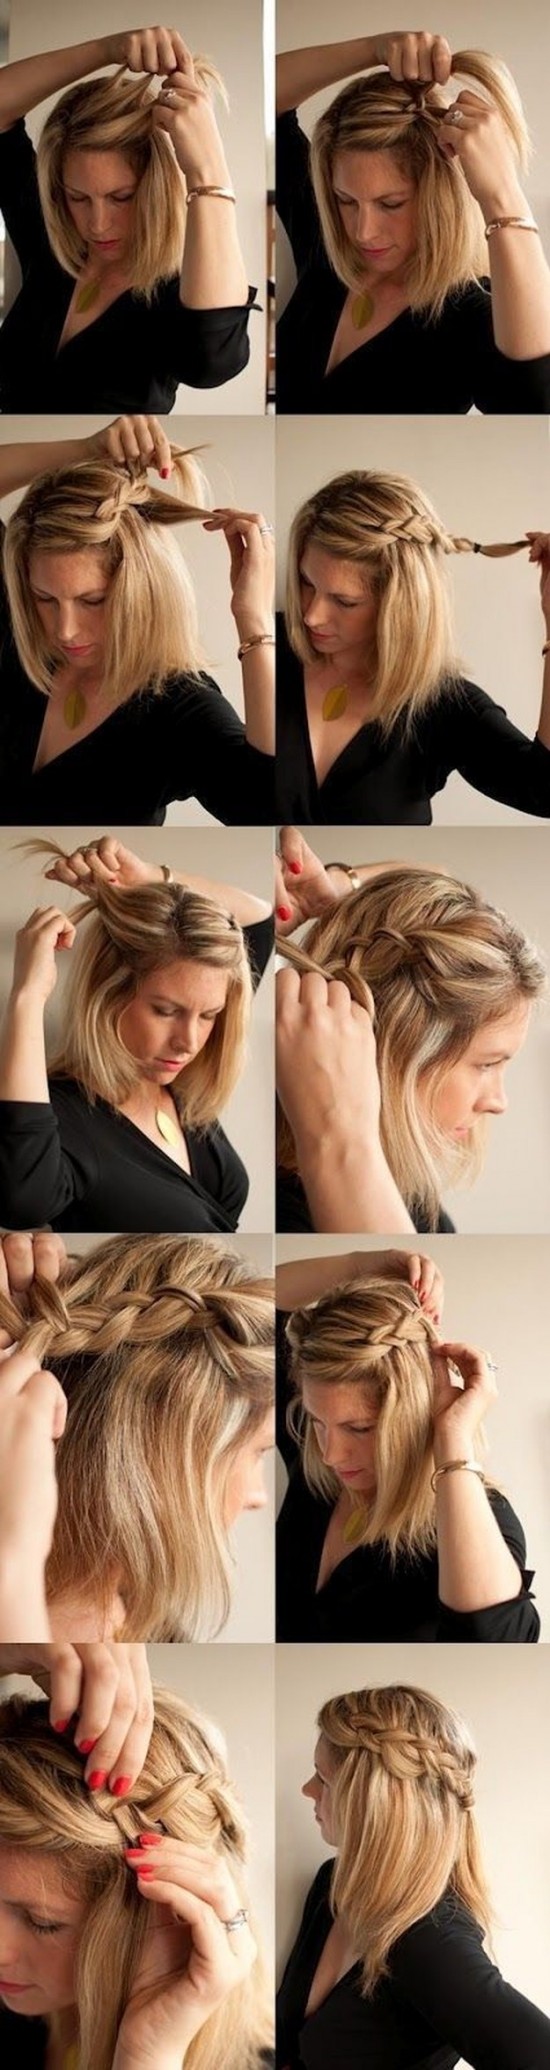 Creative-Hairstyles-That-You-Can-Easily-Do-at-Home-019